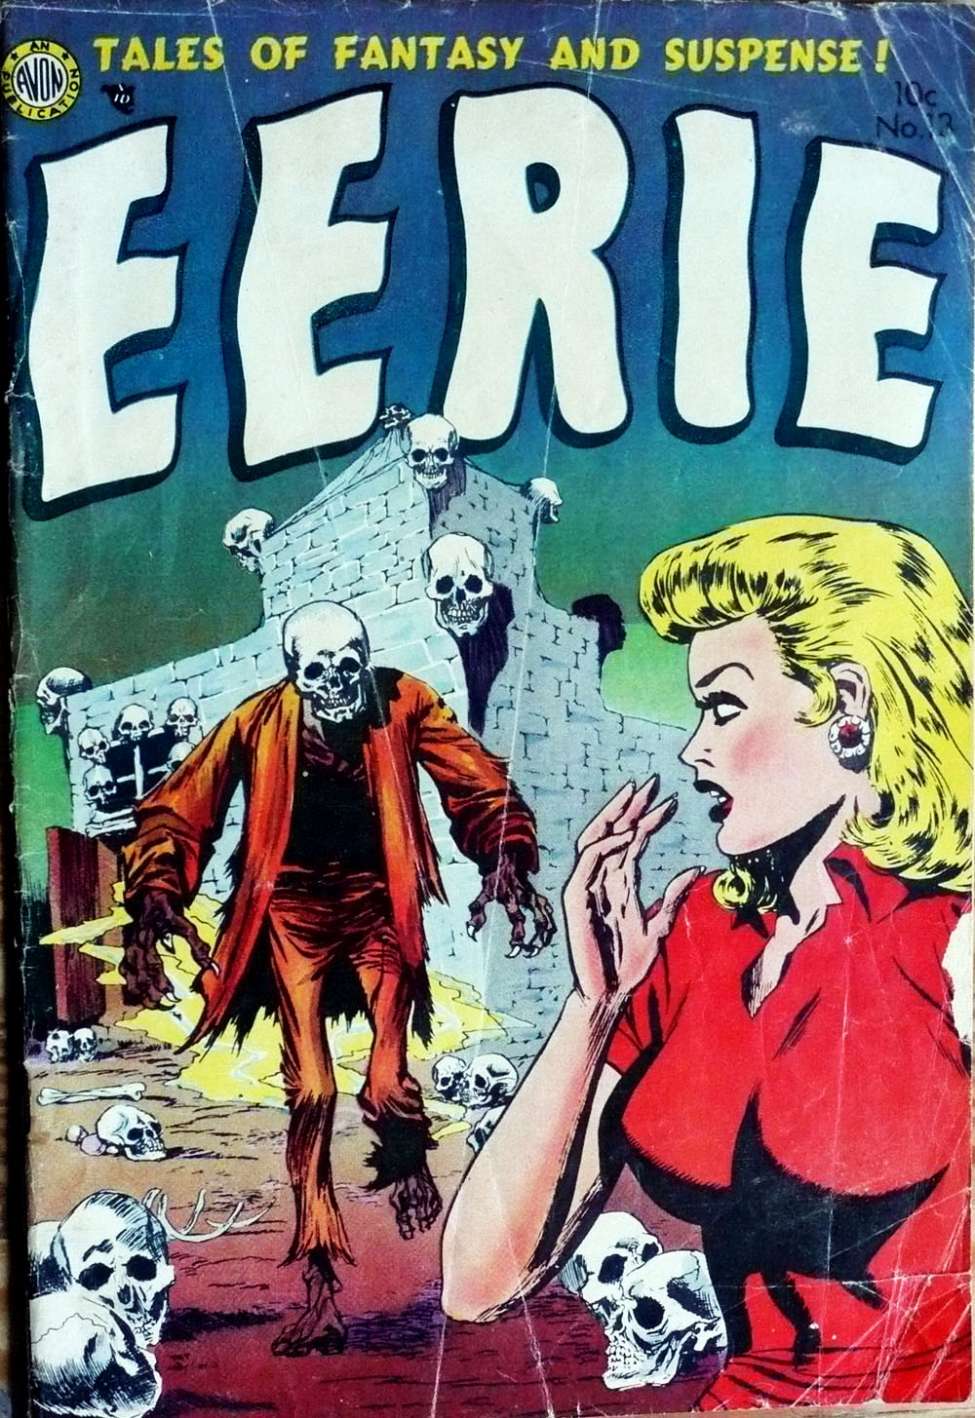 Comic Book Cover For Eerie 13 (digcam)